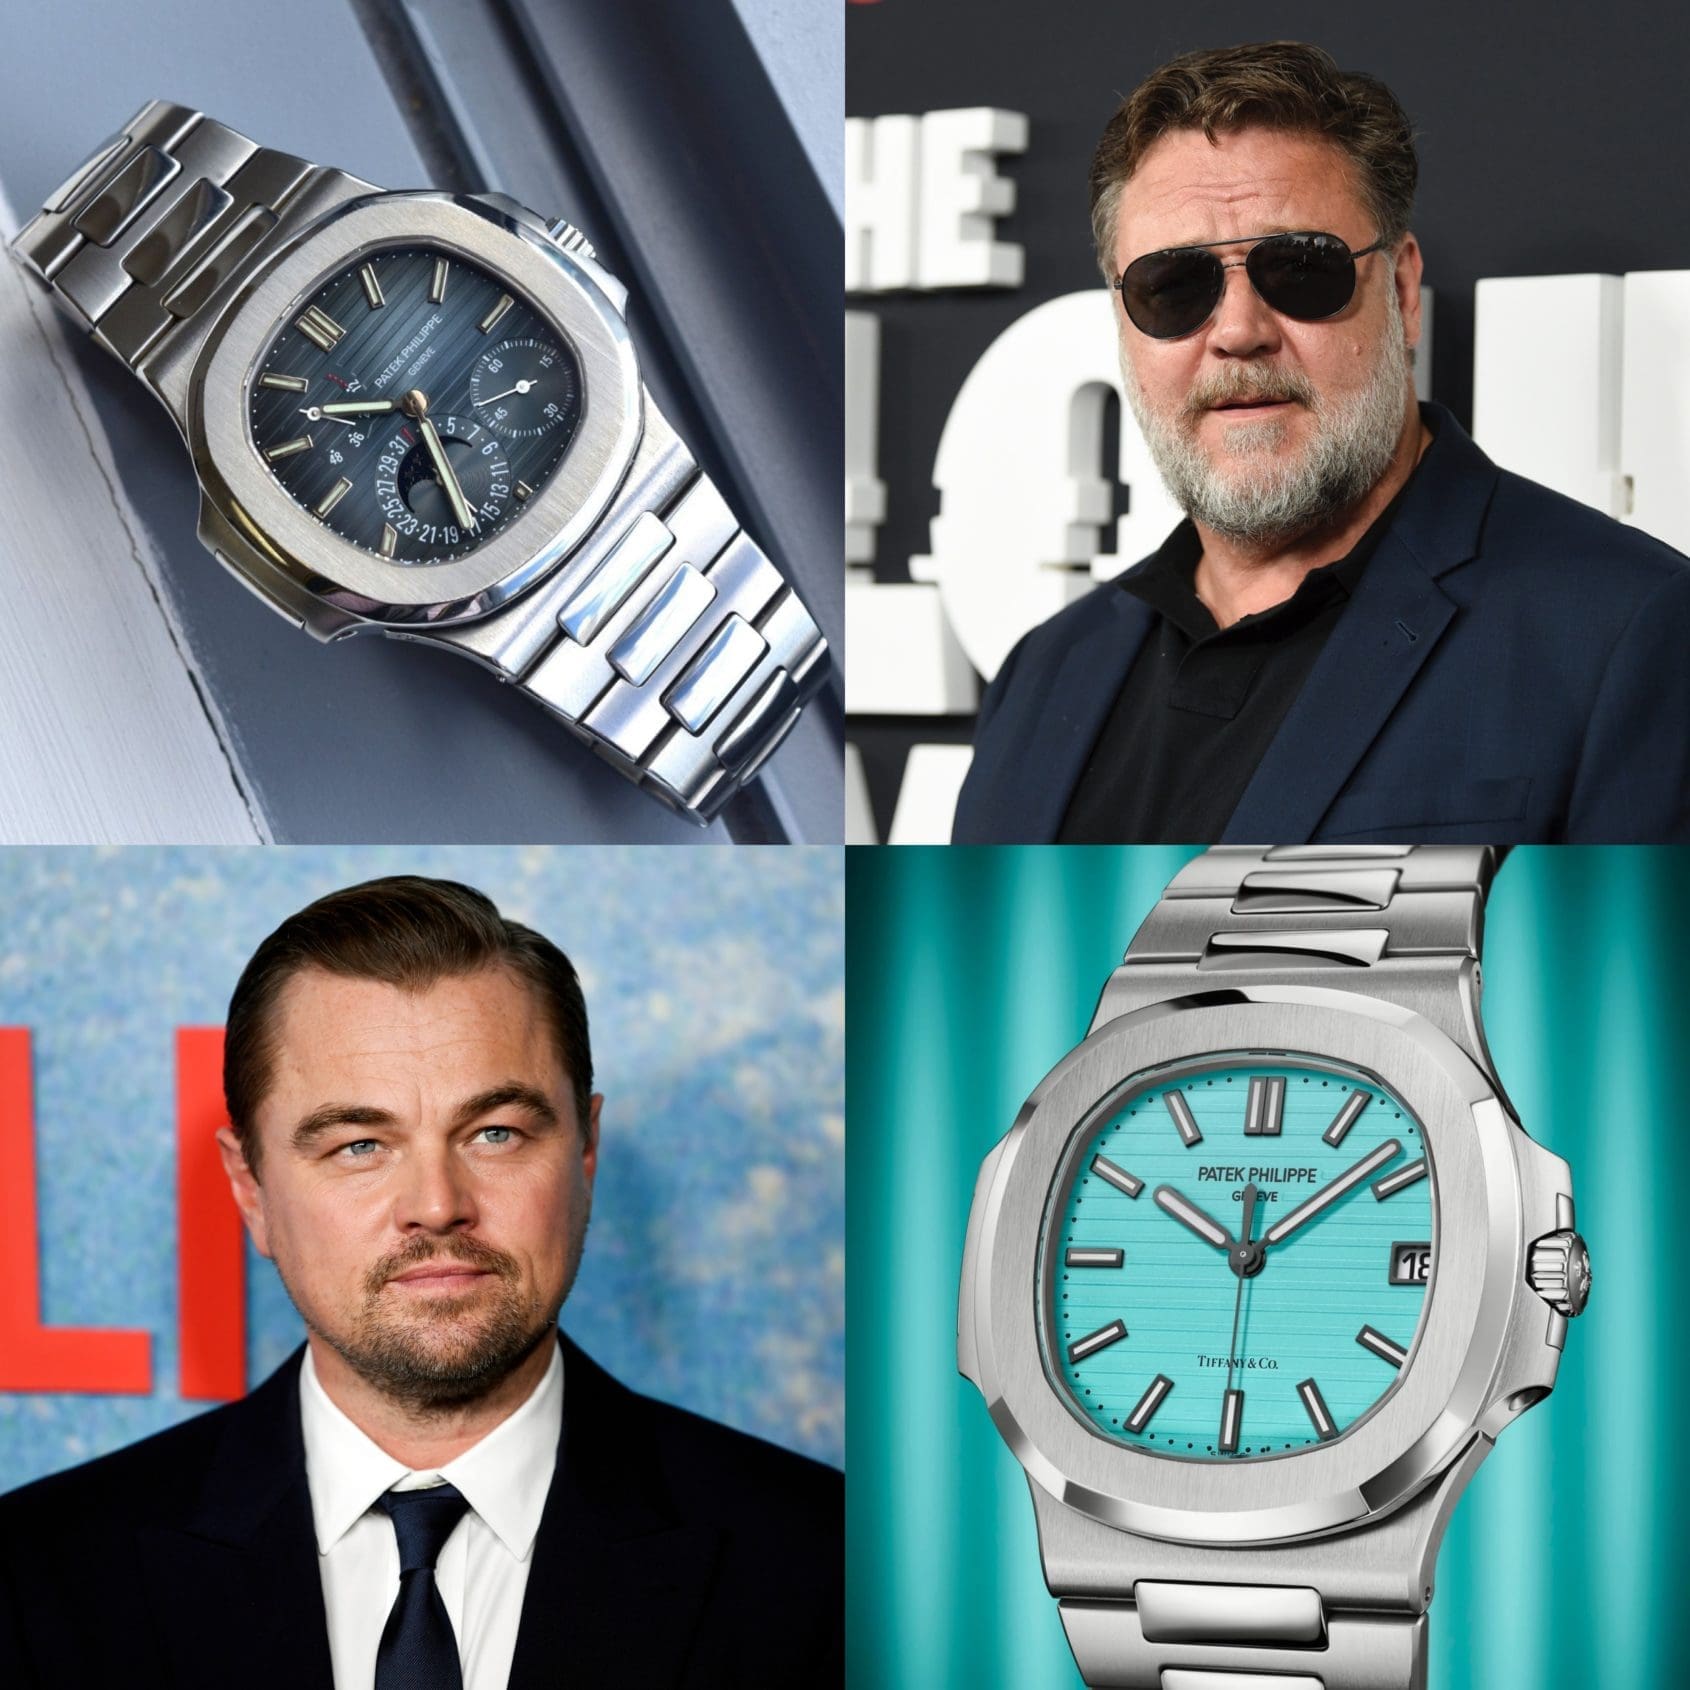 Patek Philippe Nautilus Tiffany Blue - Which Celebrities Own One